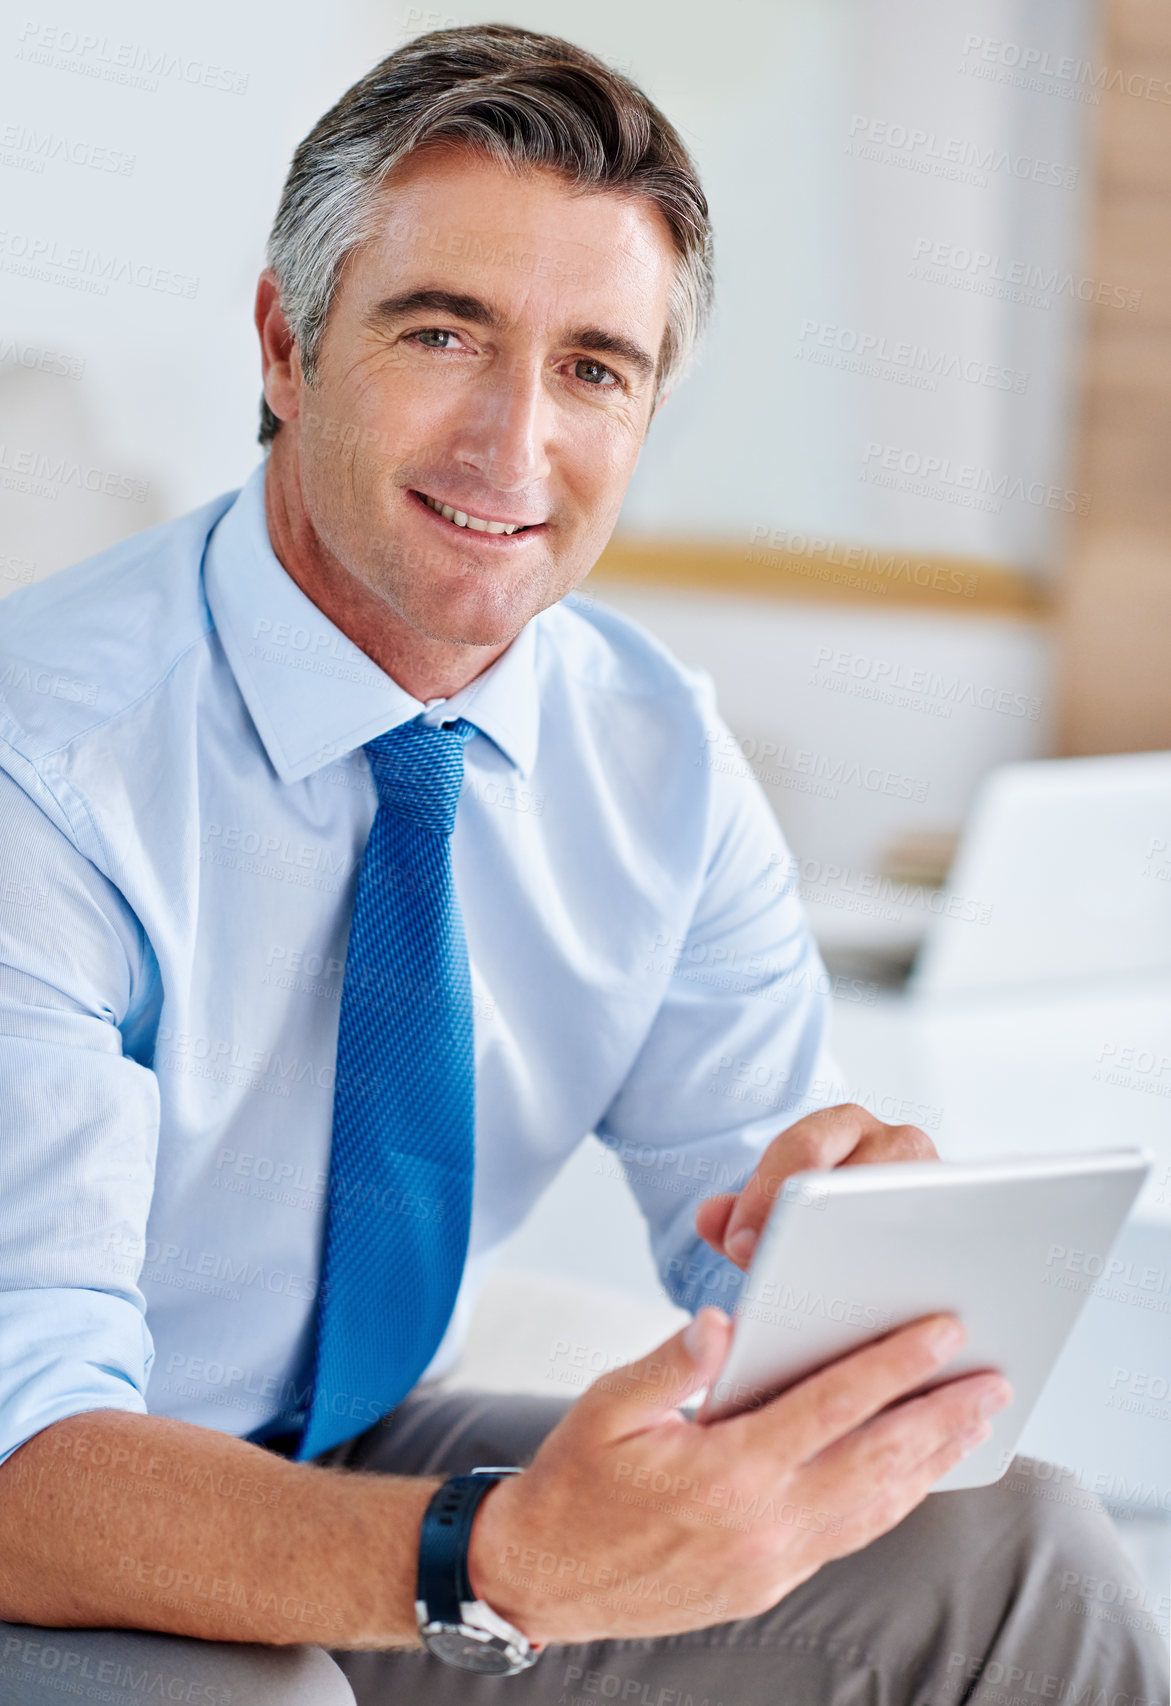 Buy stock photo Portrait of a mature businessman using a tablet while sitting on a sofa